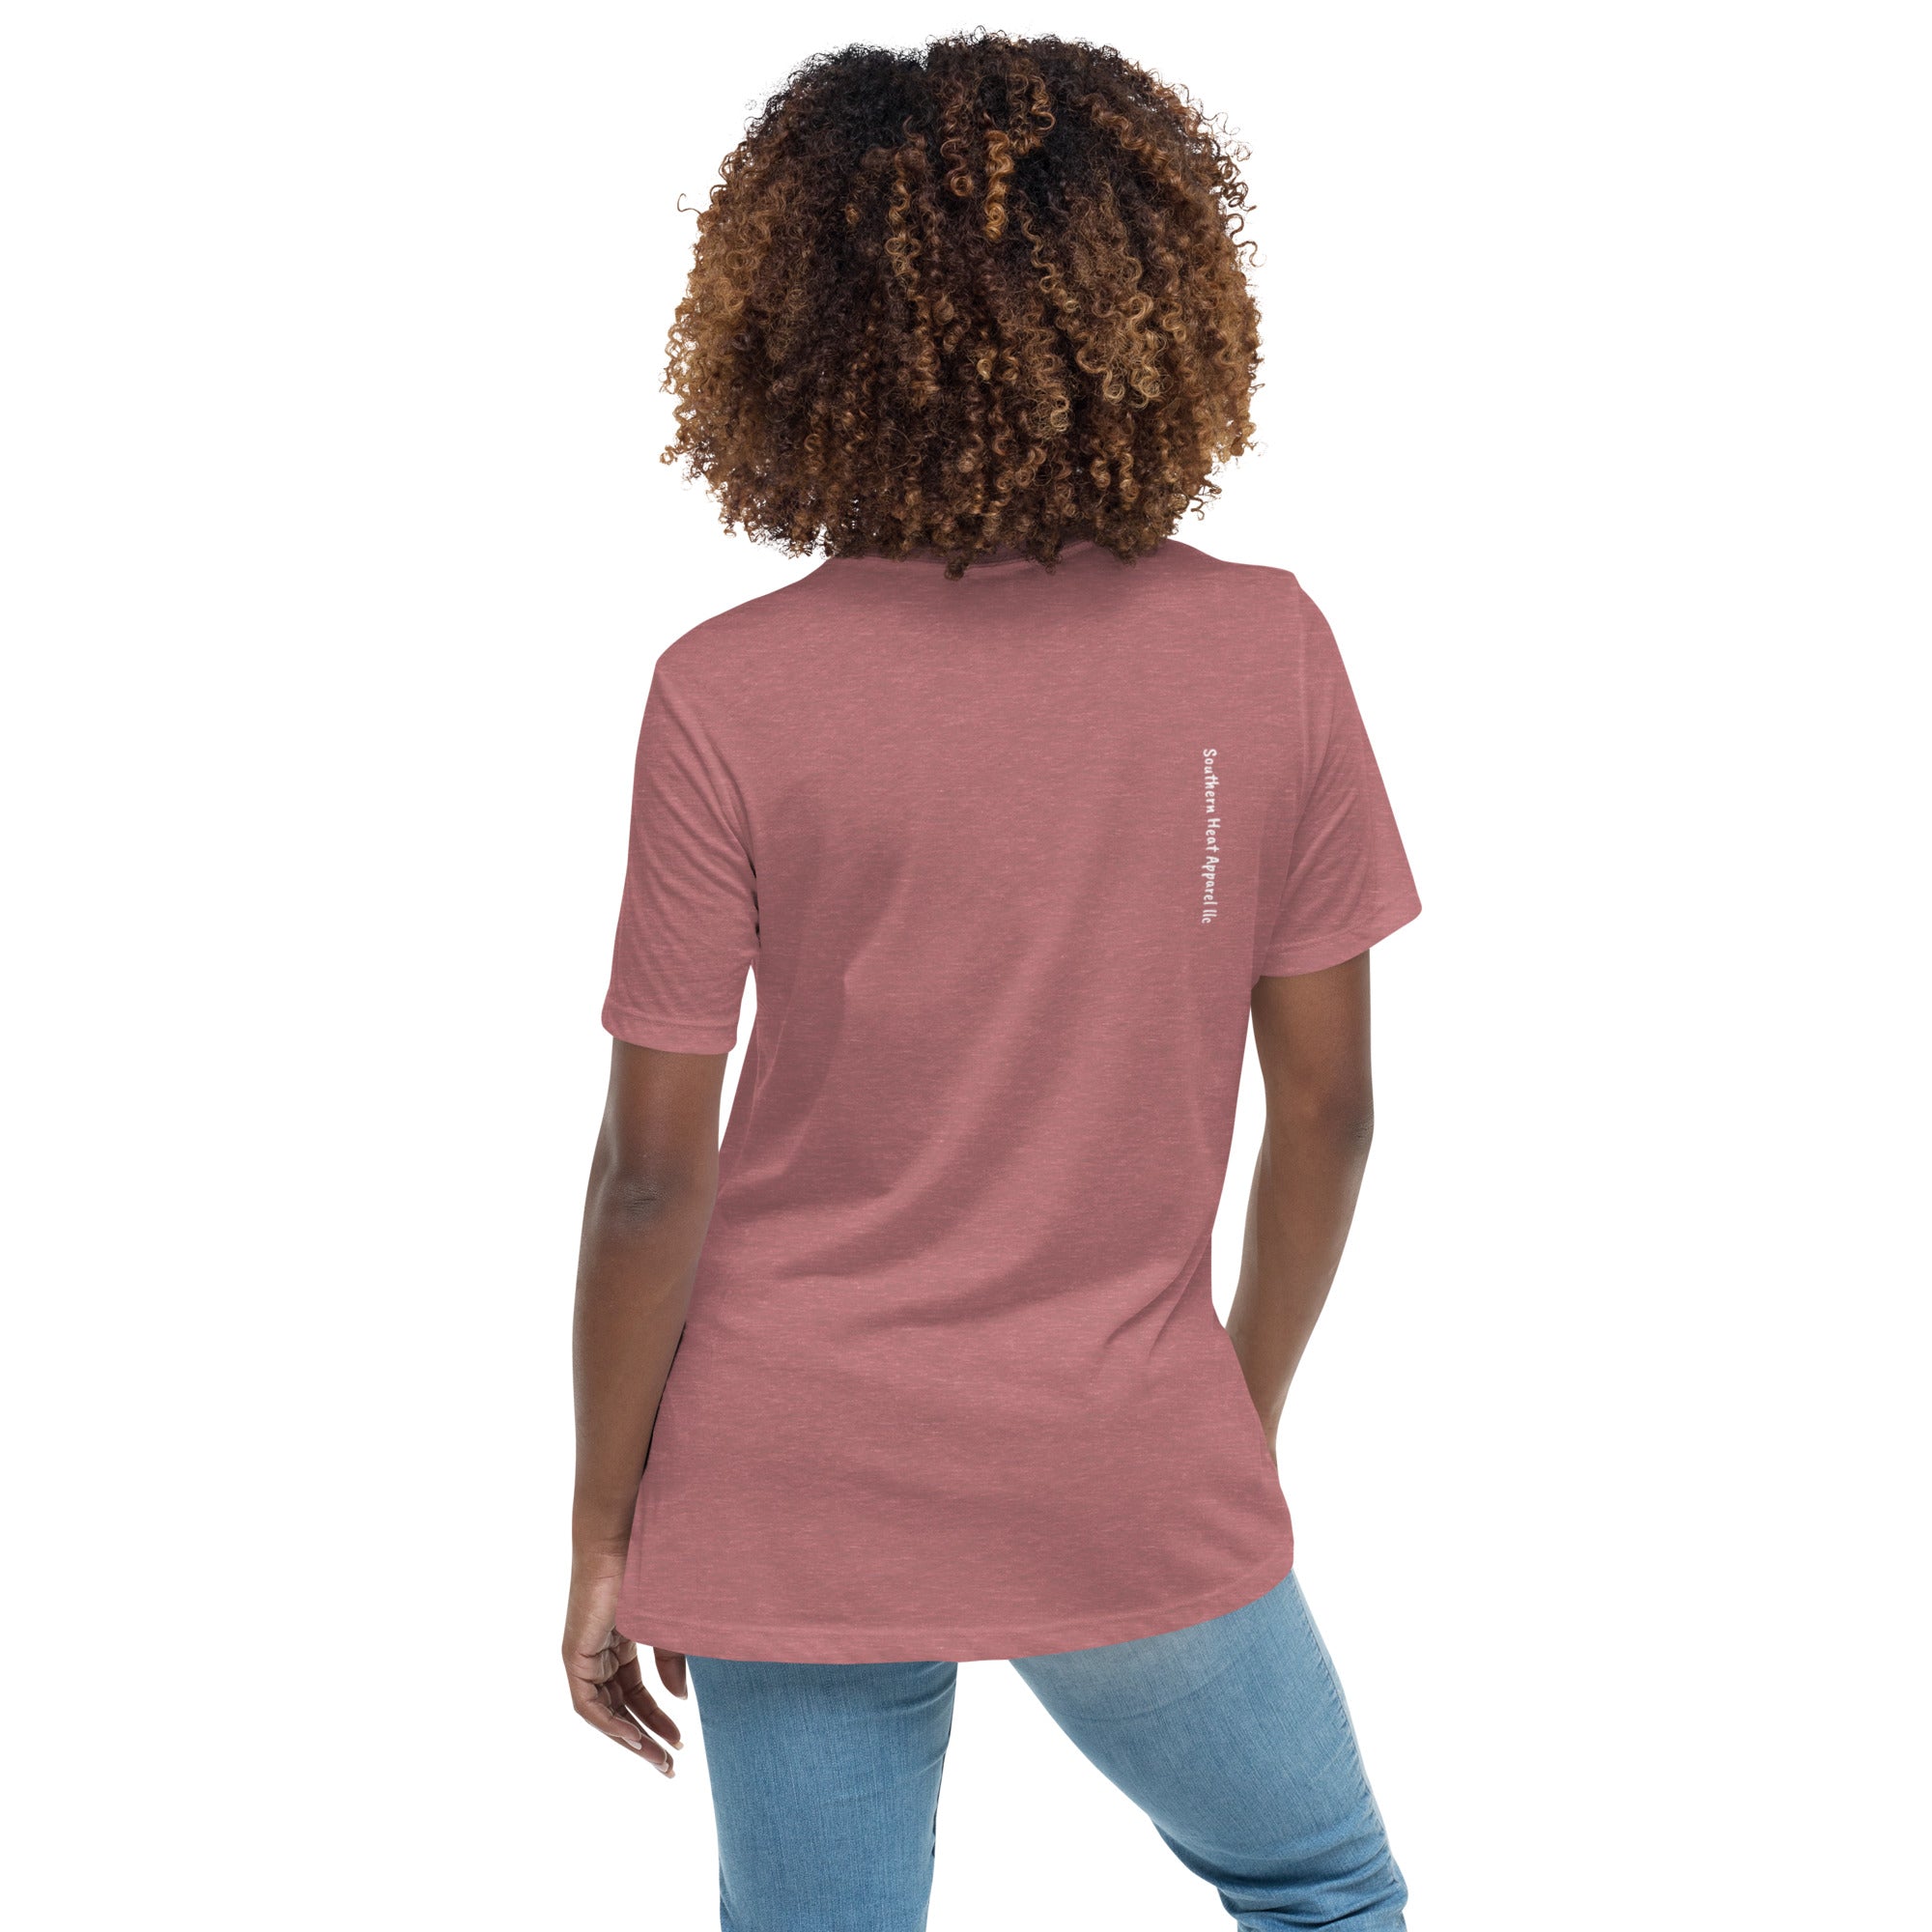 Just Country-Women's Relaxed T-Shirt